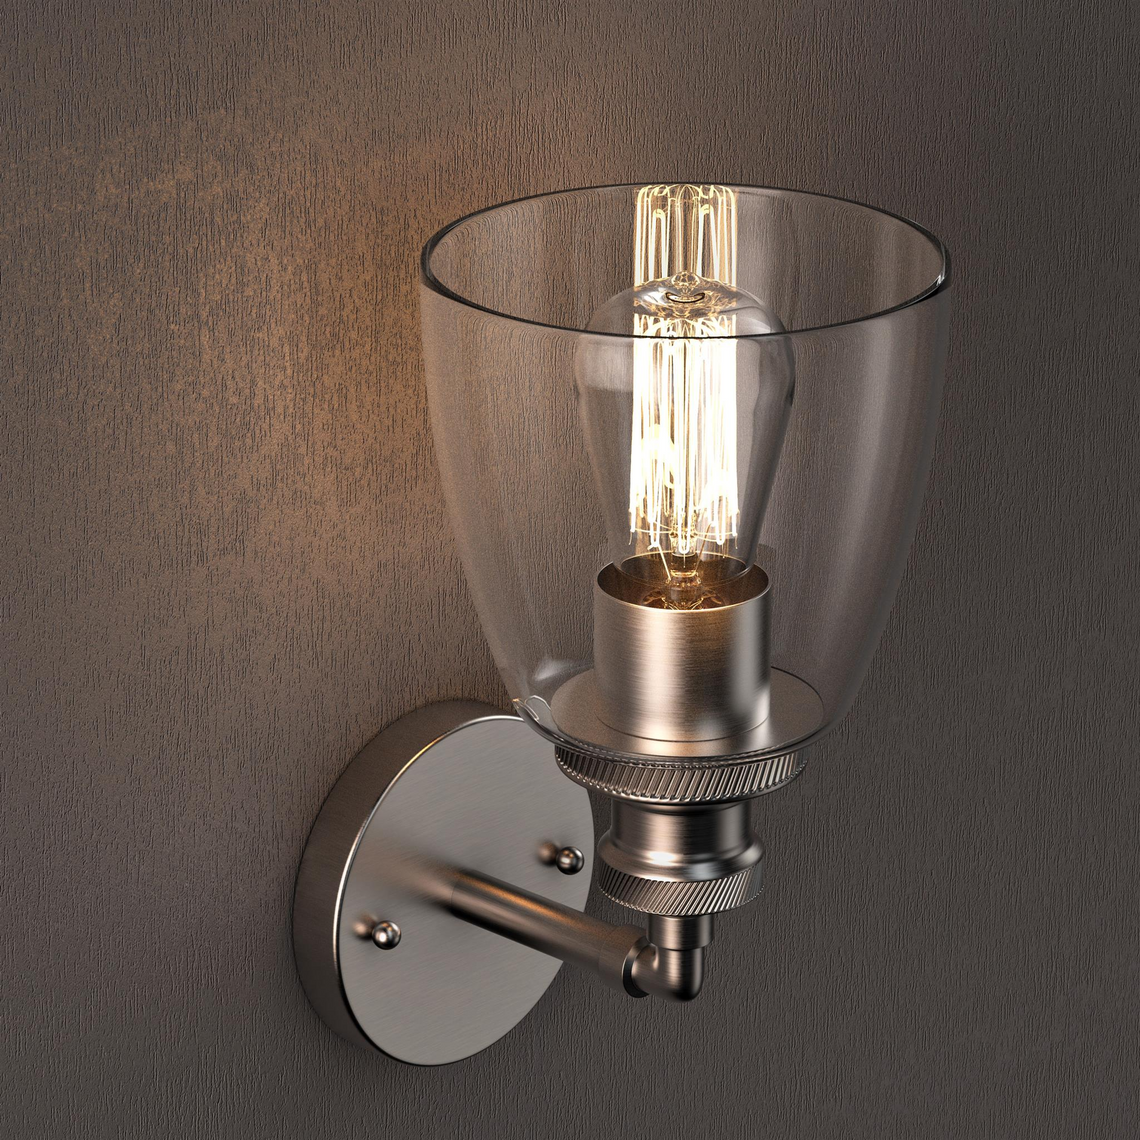 Bell Shape Wall Sconce Light, E26 Base, Brushed Nickel Finish, Wall Light Fixtures, UL Listed